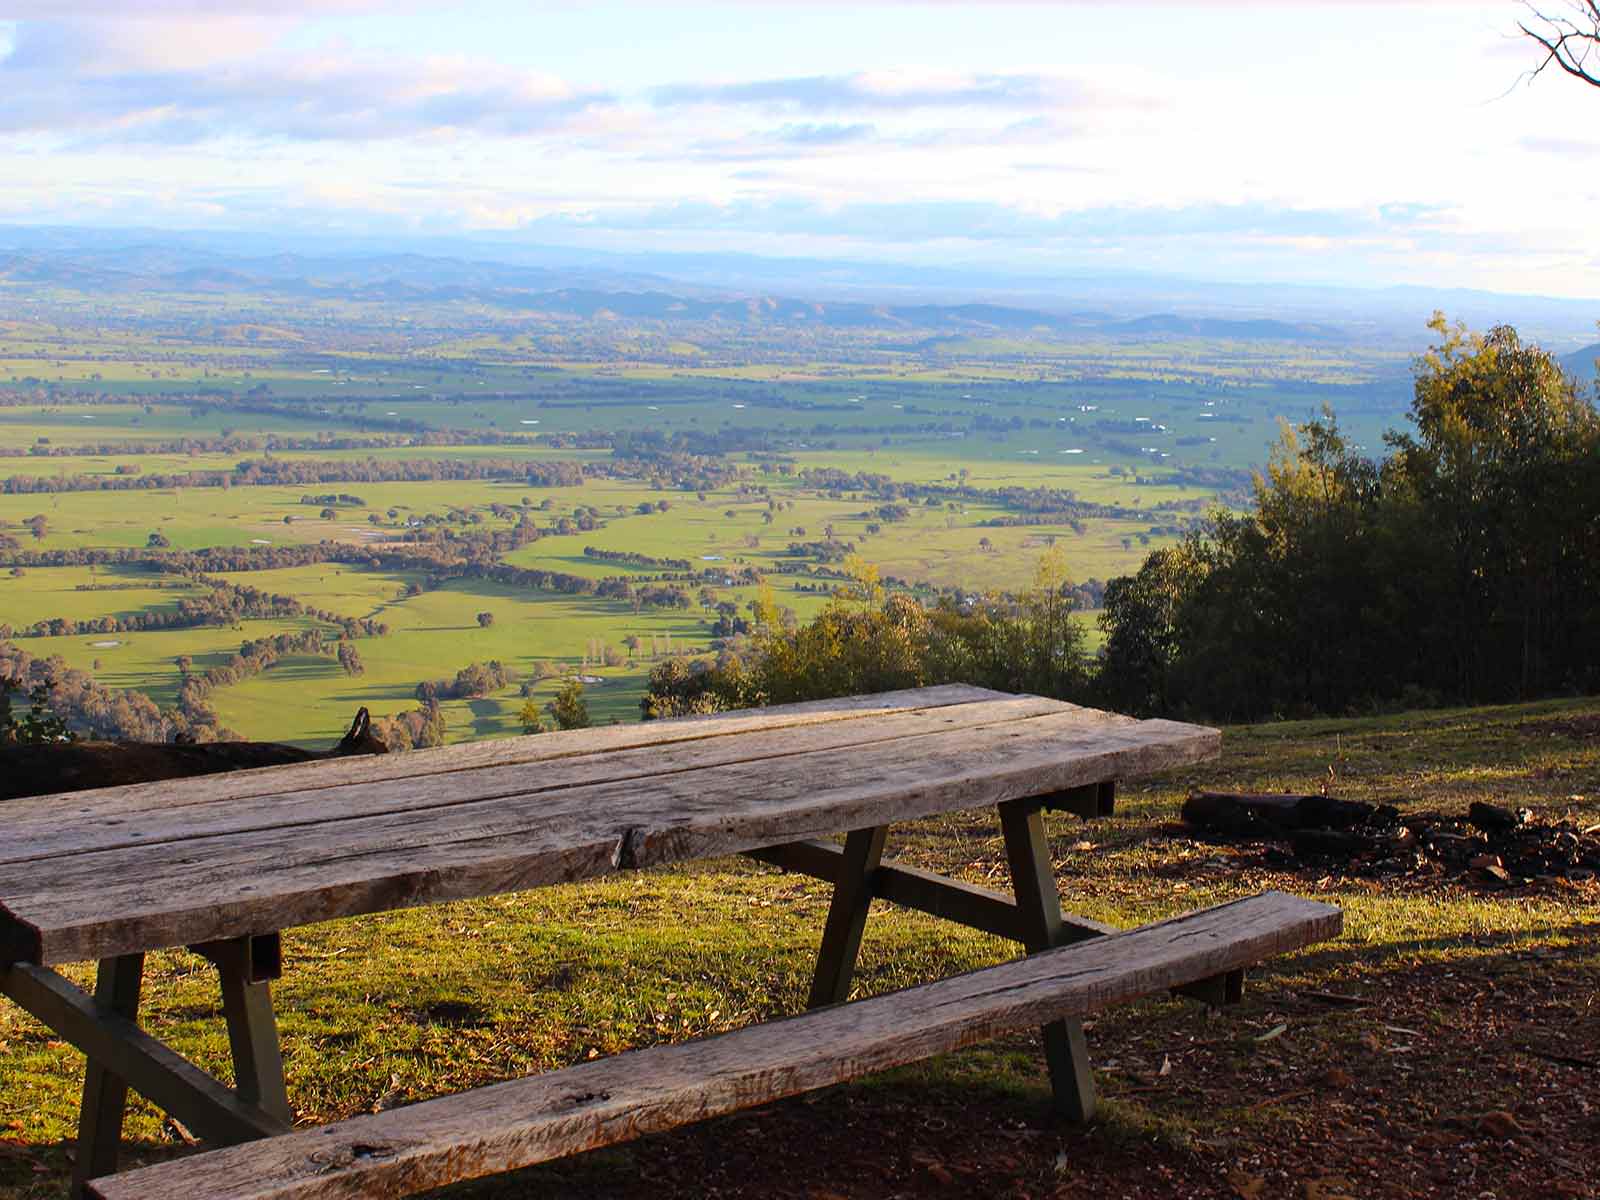 Picnicking at Murmungee Lookout - Victoria's High Country